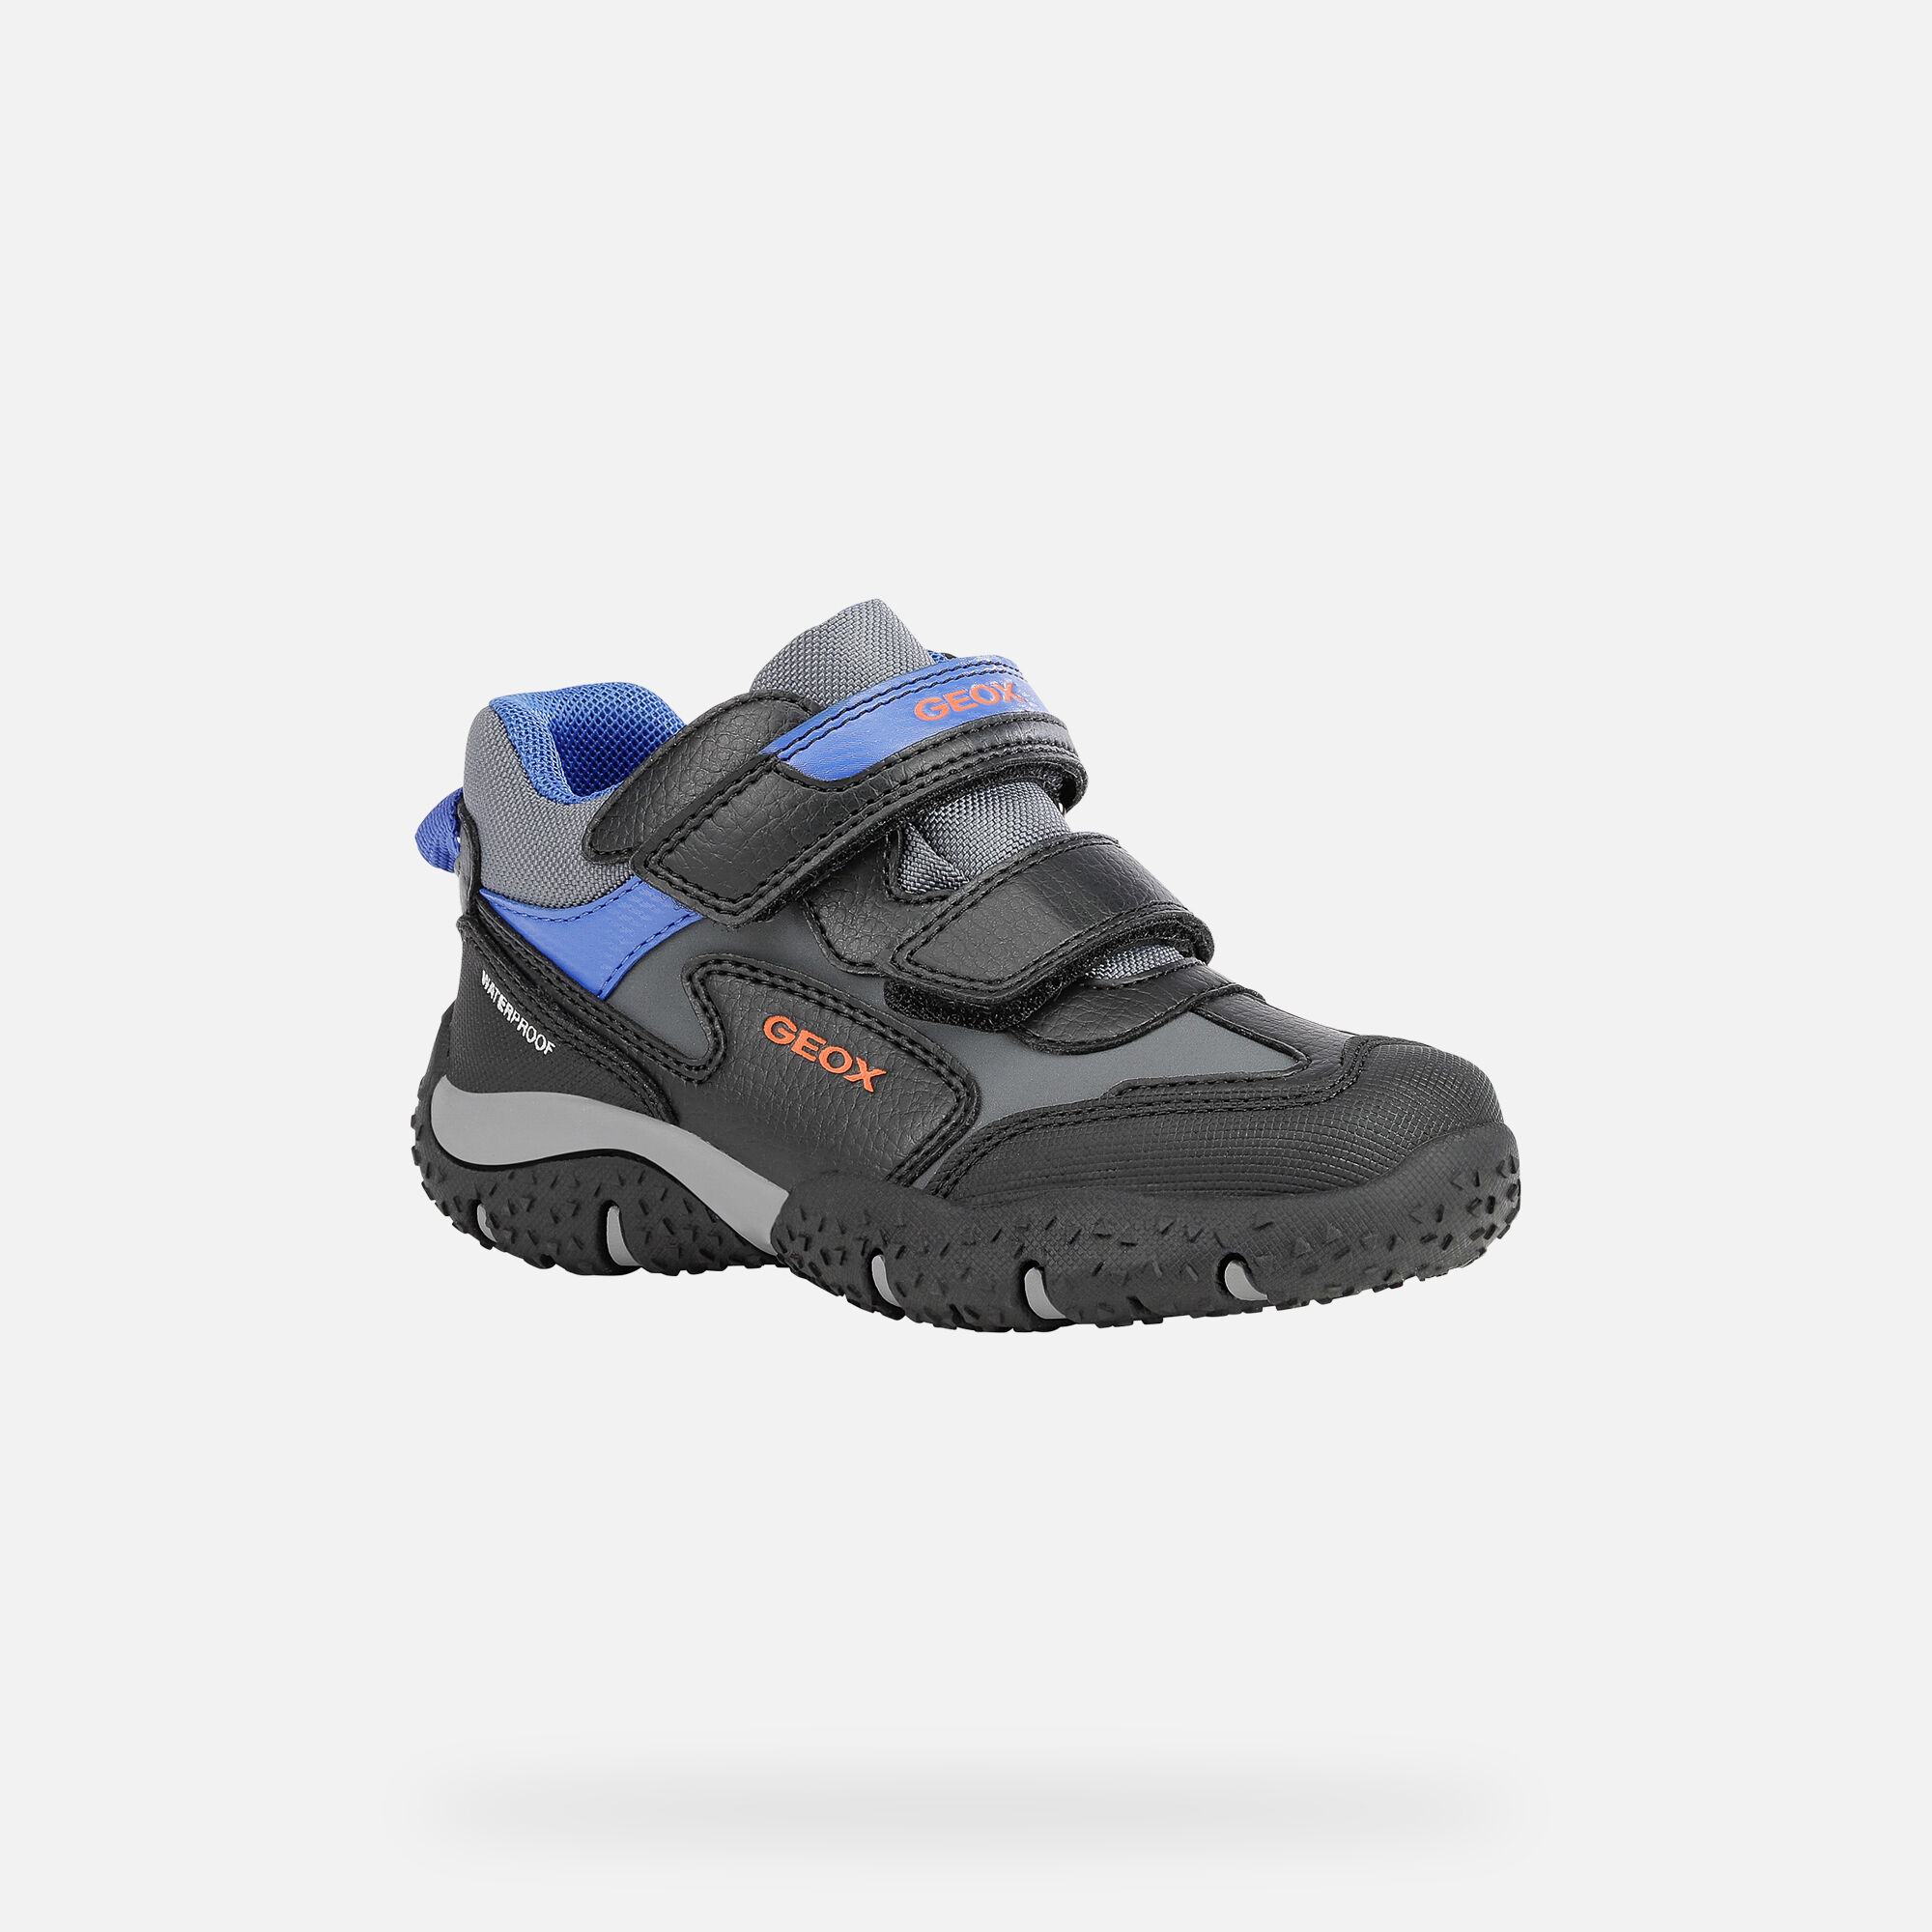 geox junior shoes